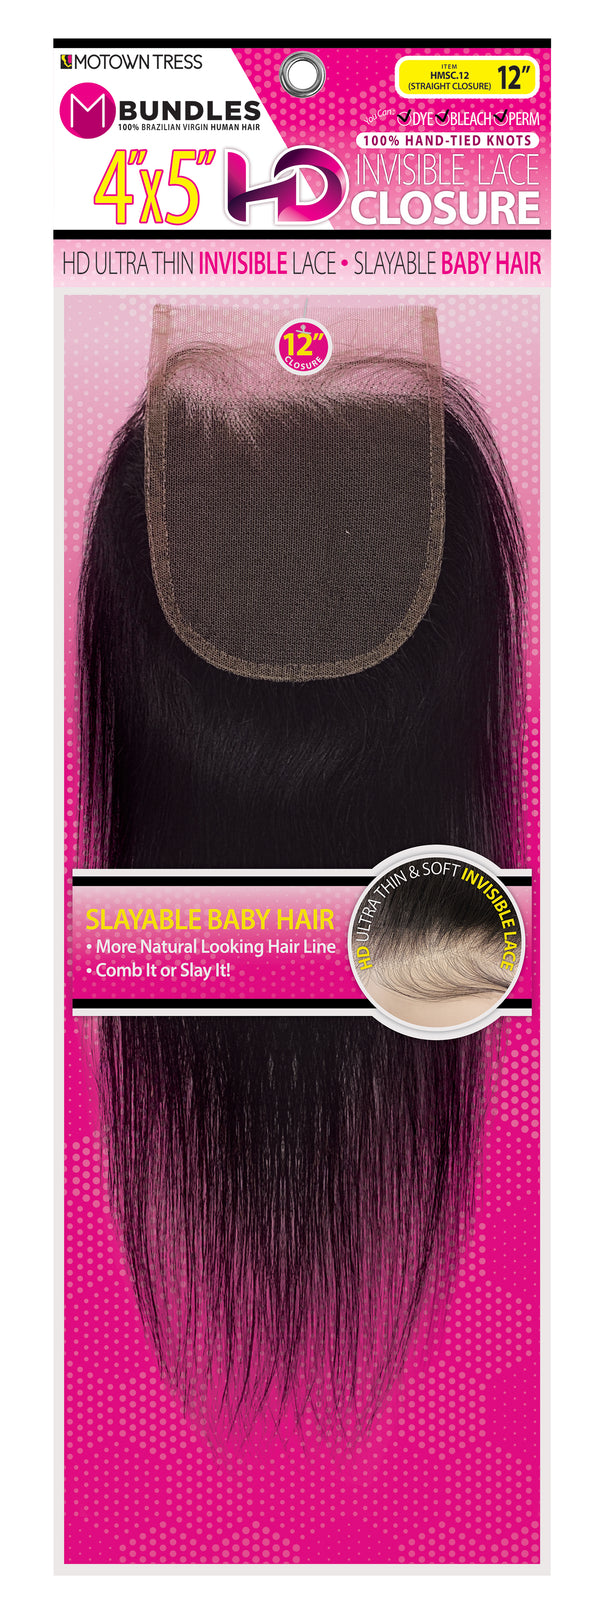 PINK_4"x5" HD INVISIBLE LACE CLOSURE STRAIGHT